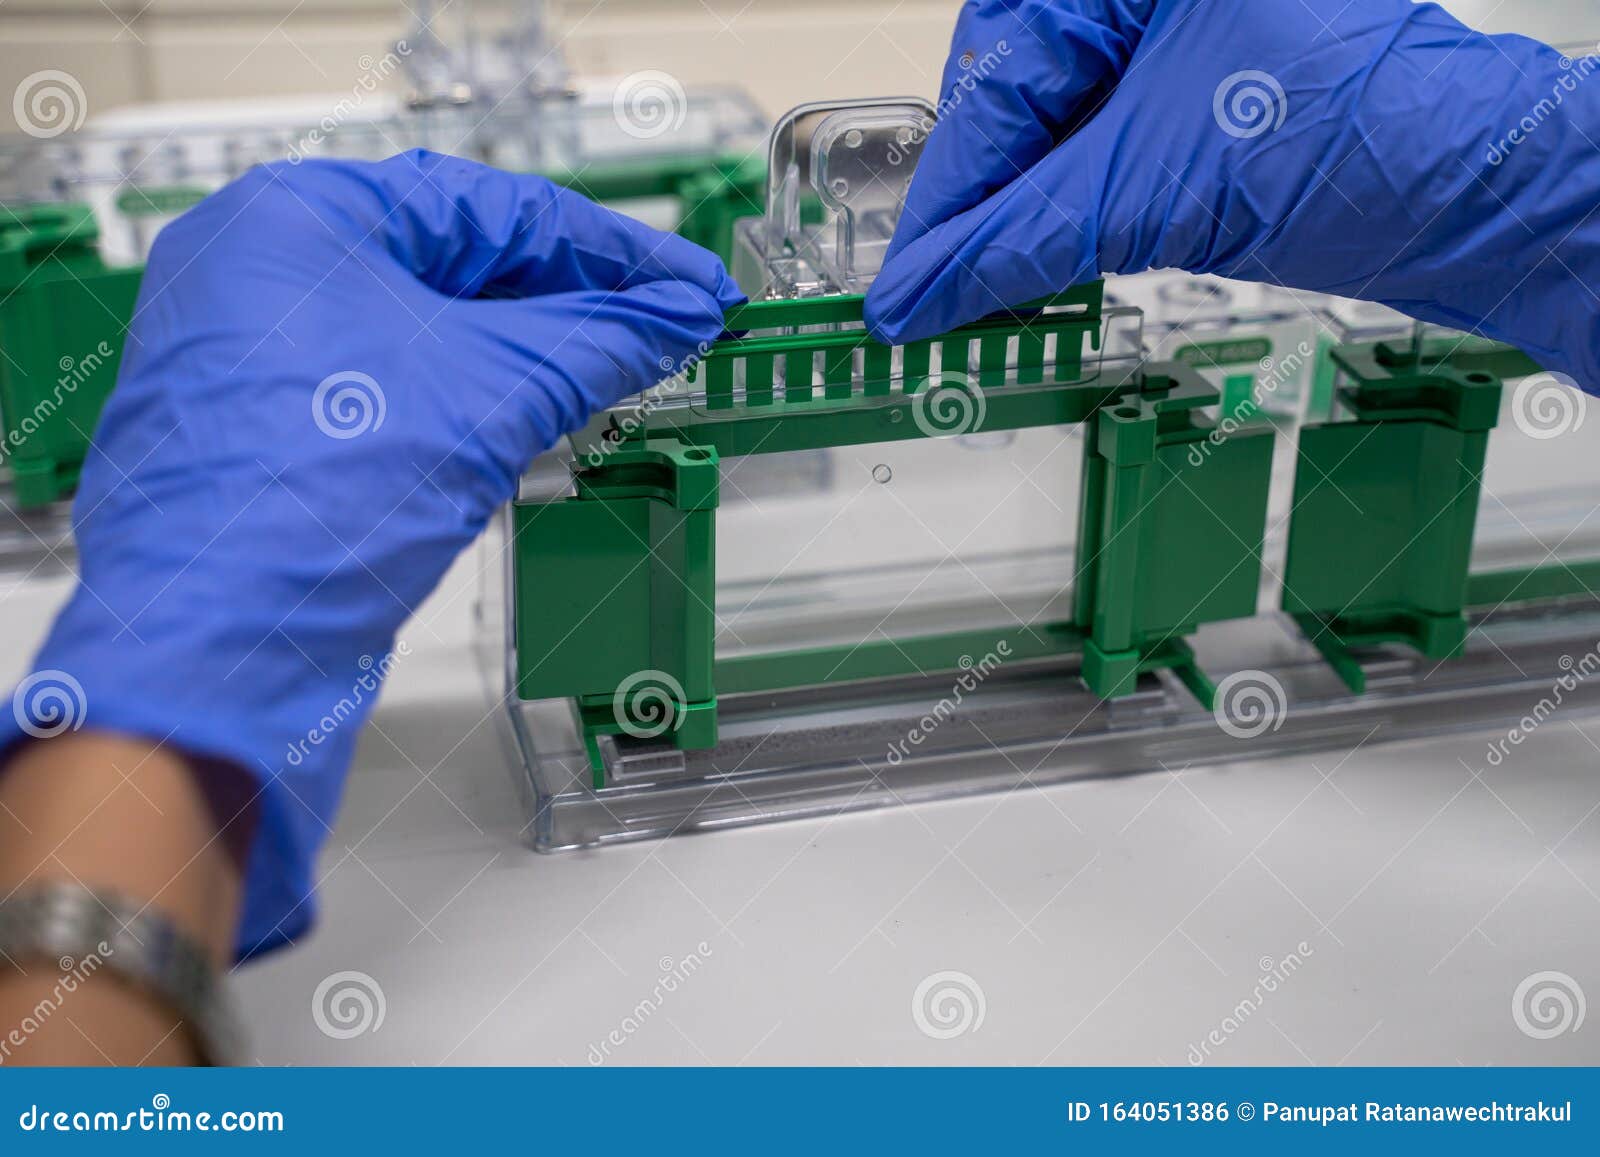 the general process preparation for protein levels detection is using western blot analysis. this method is involved in protein